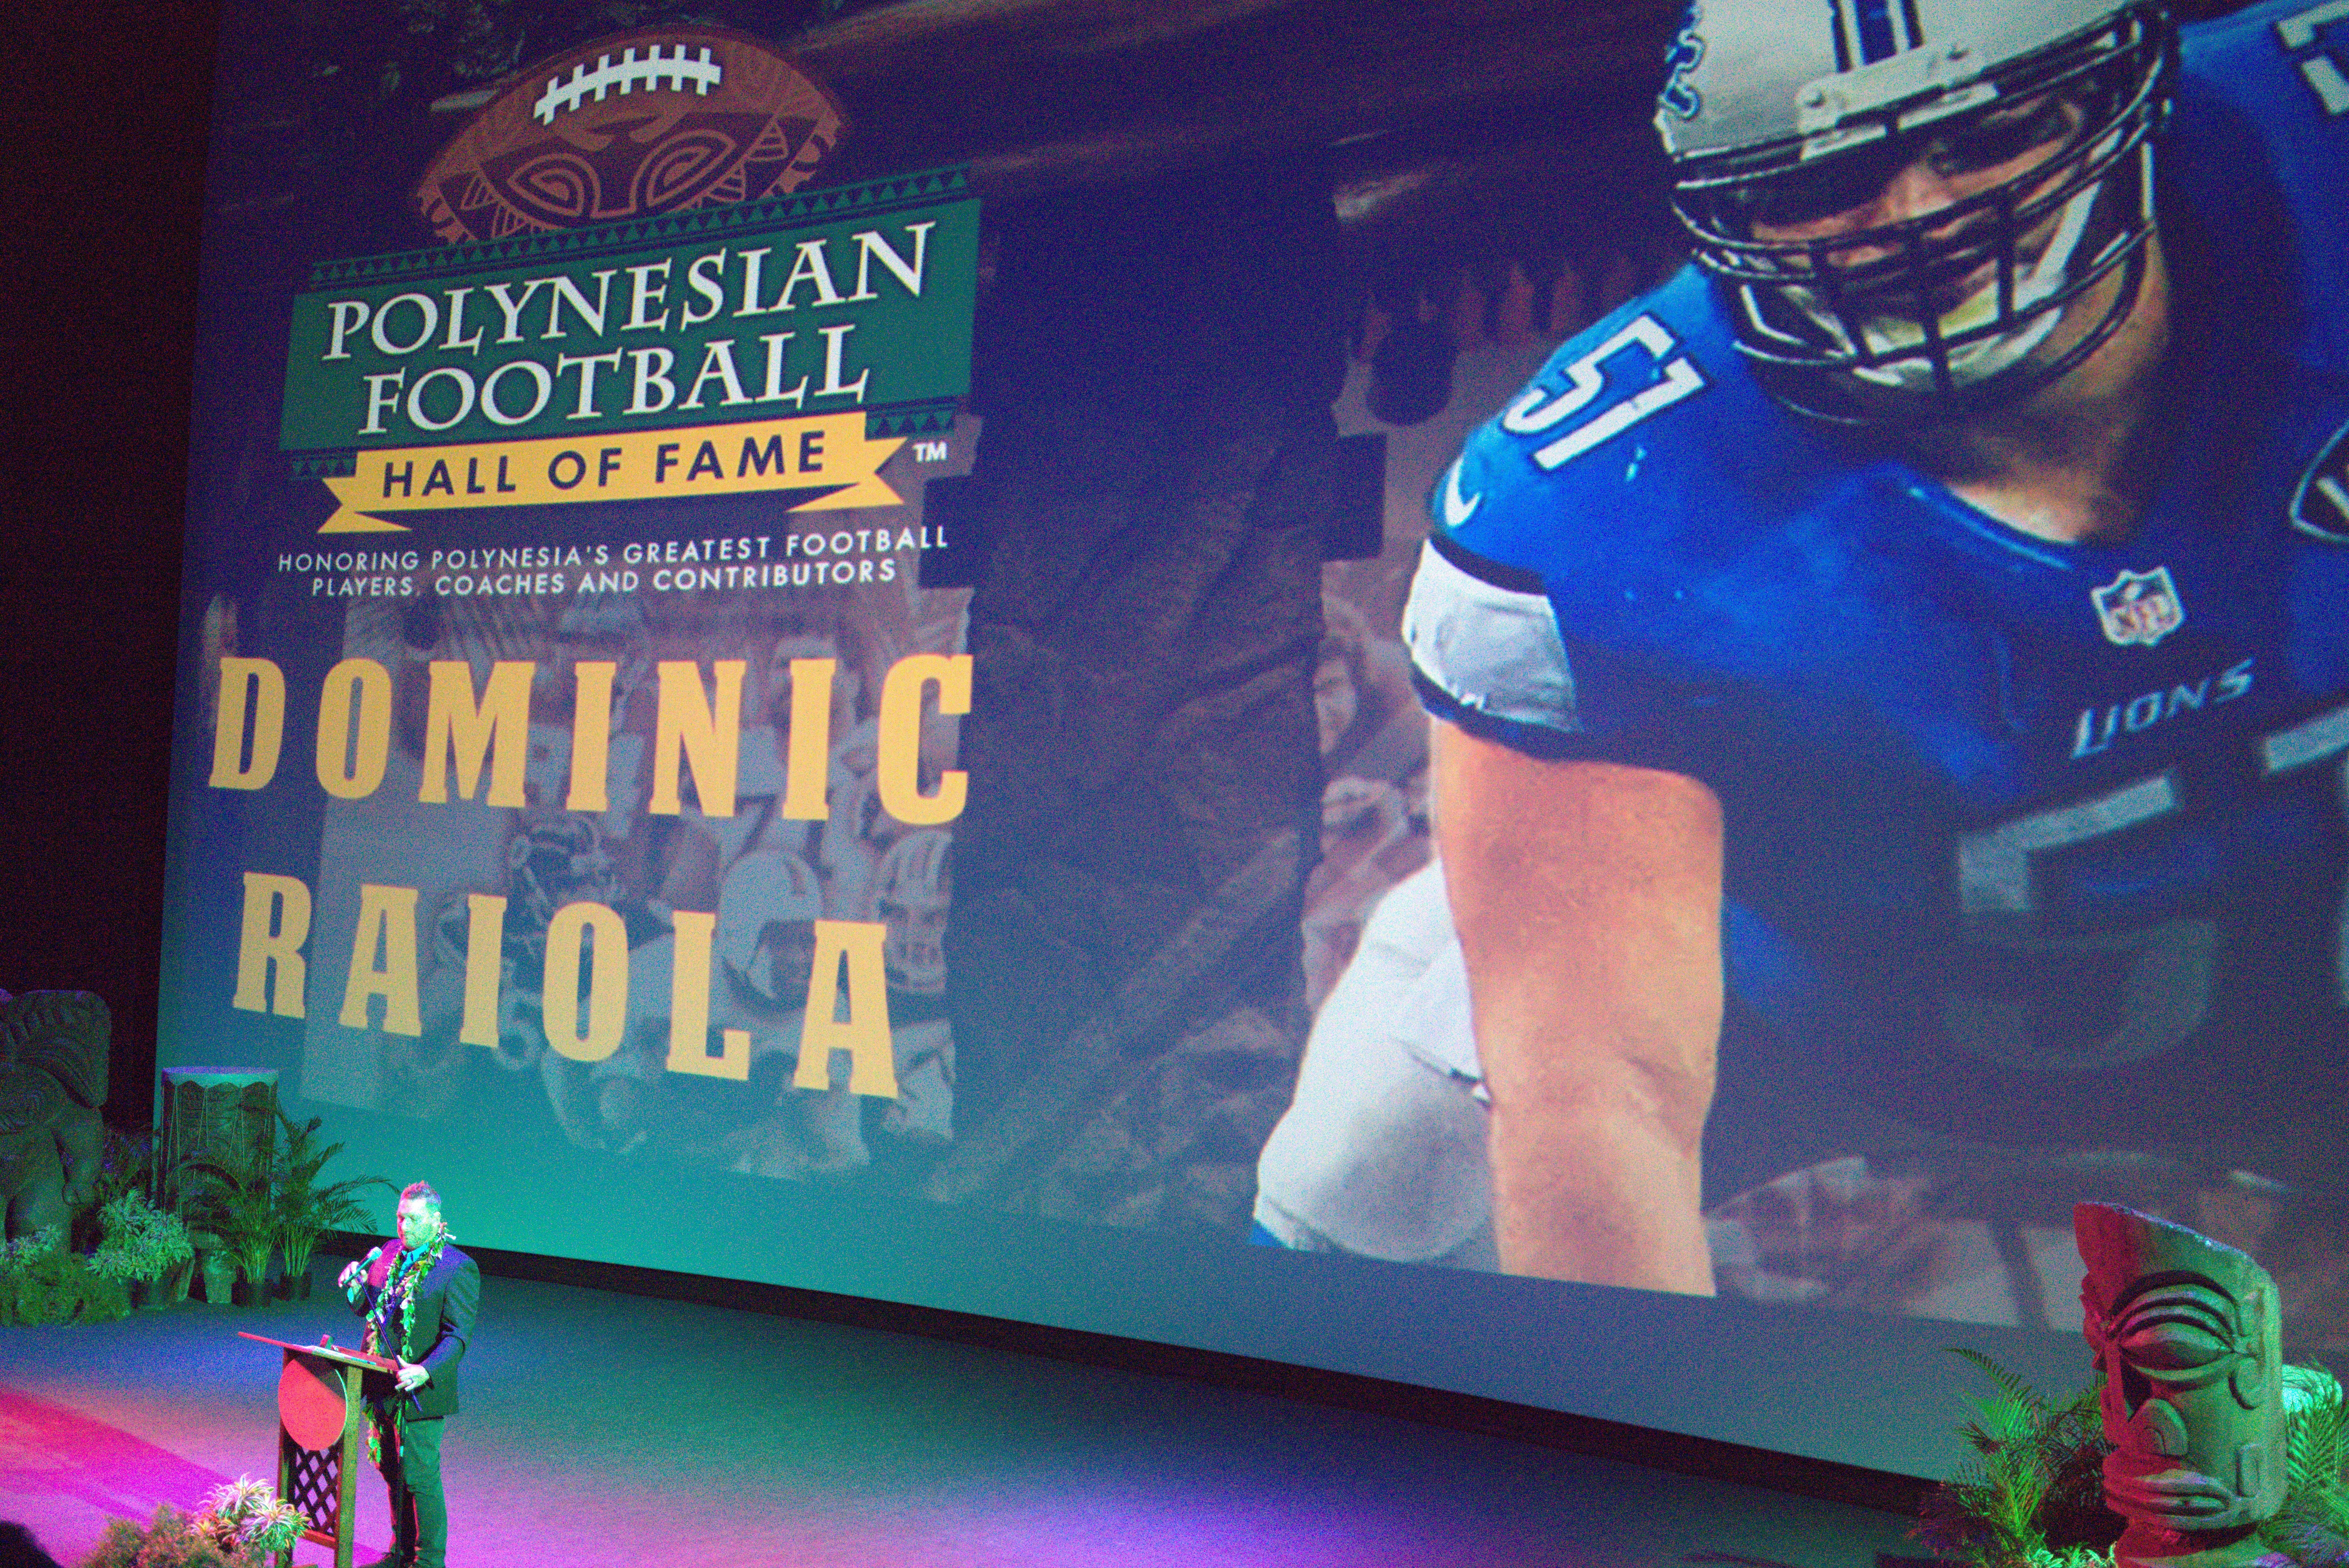 Photo of Dominic Raiola sharing his thoughts at the Polynesian Football Hall of Fame 2019 inductee celebration at the Polynesian Cultural Center.